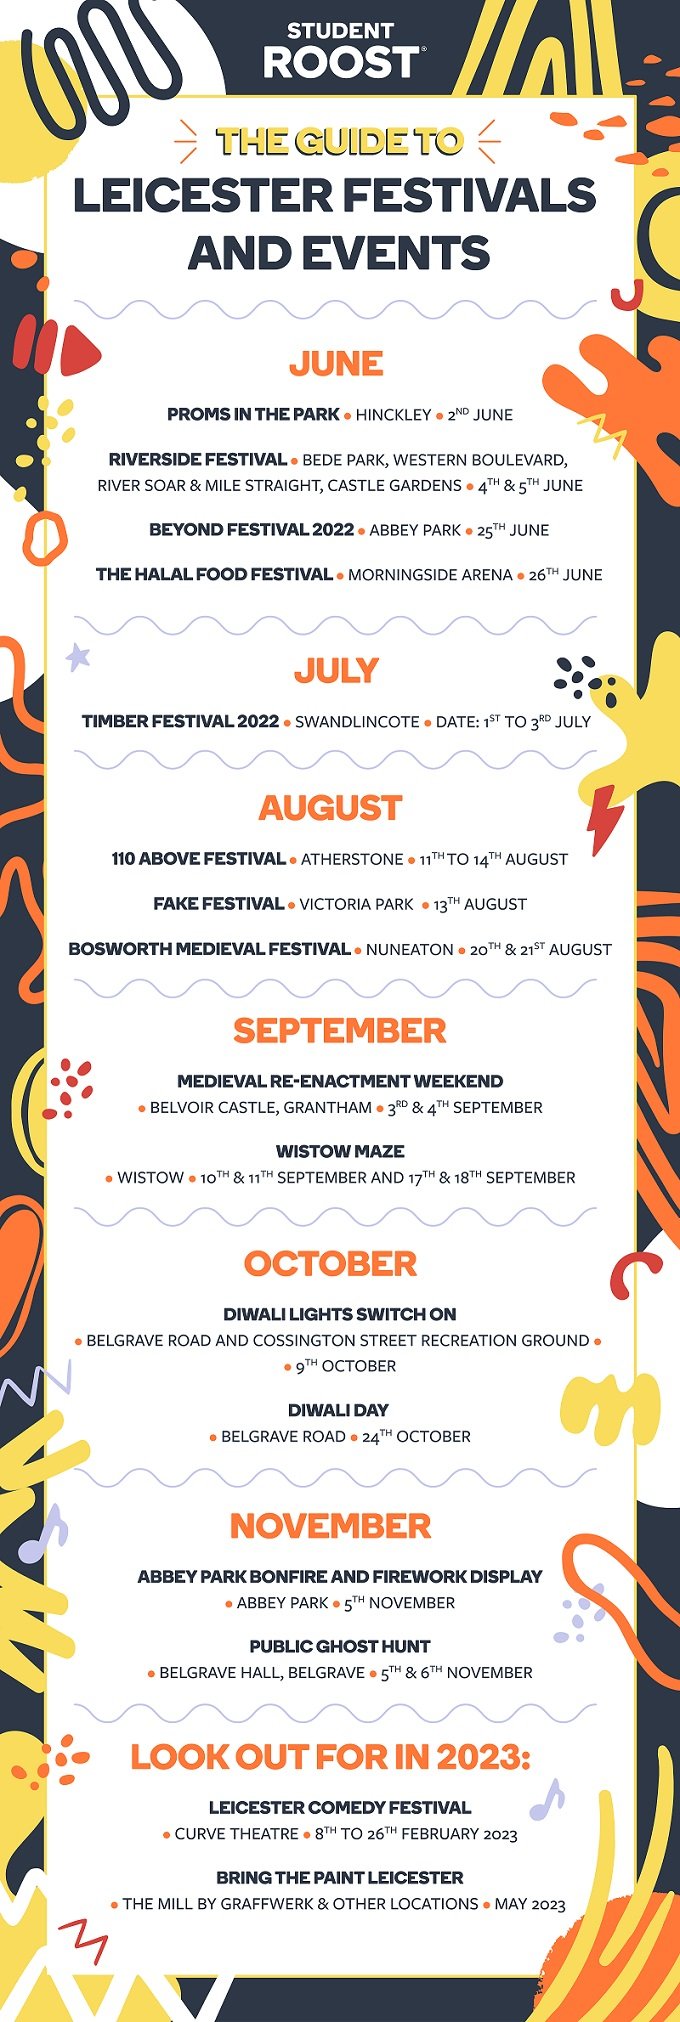 Student Roost - Events Calendar Infographic-1